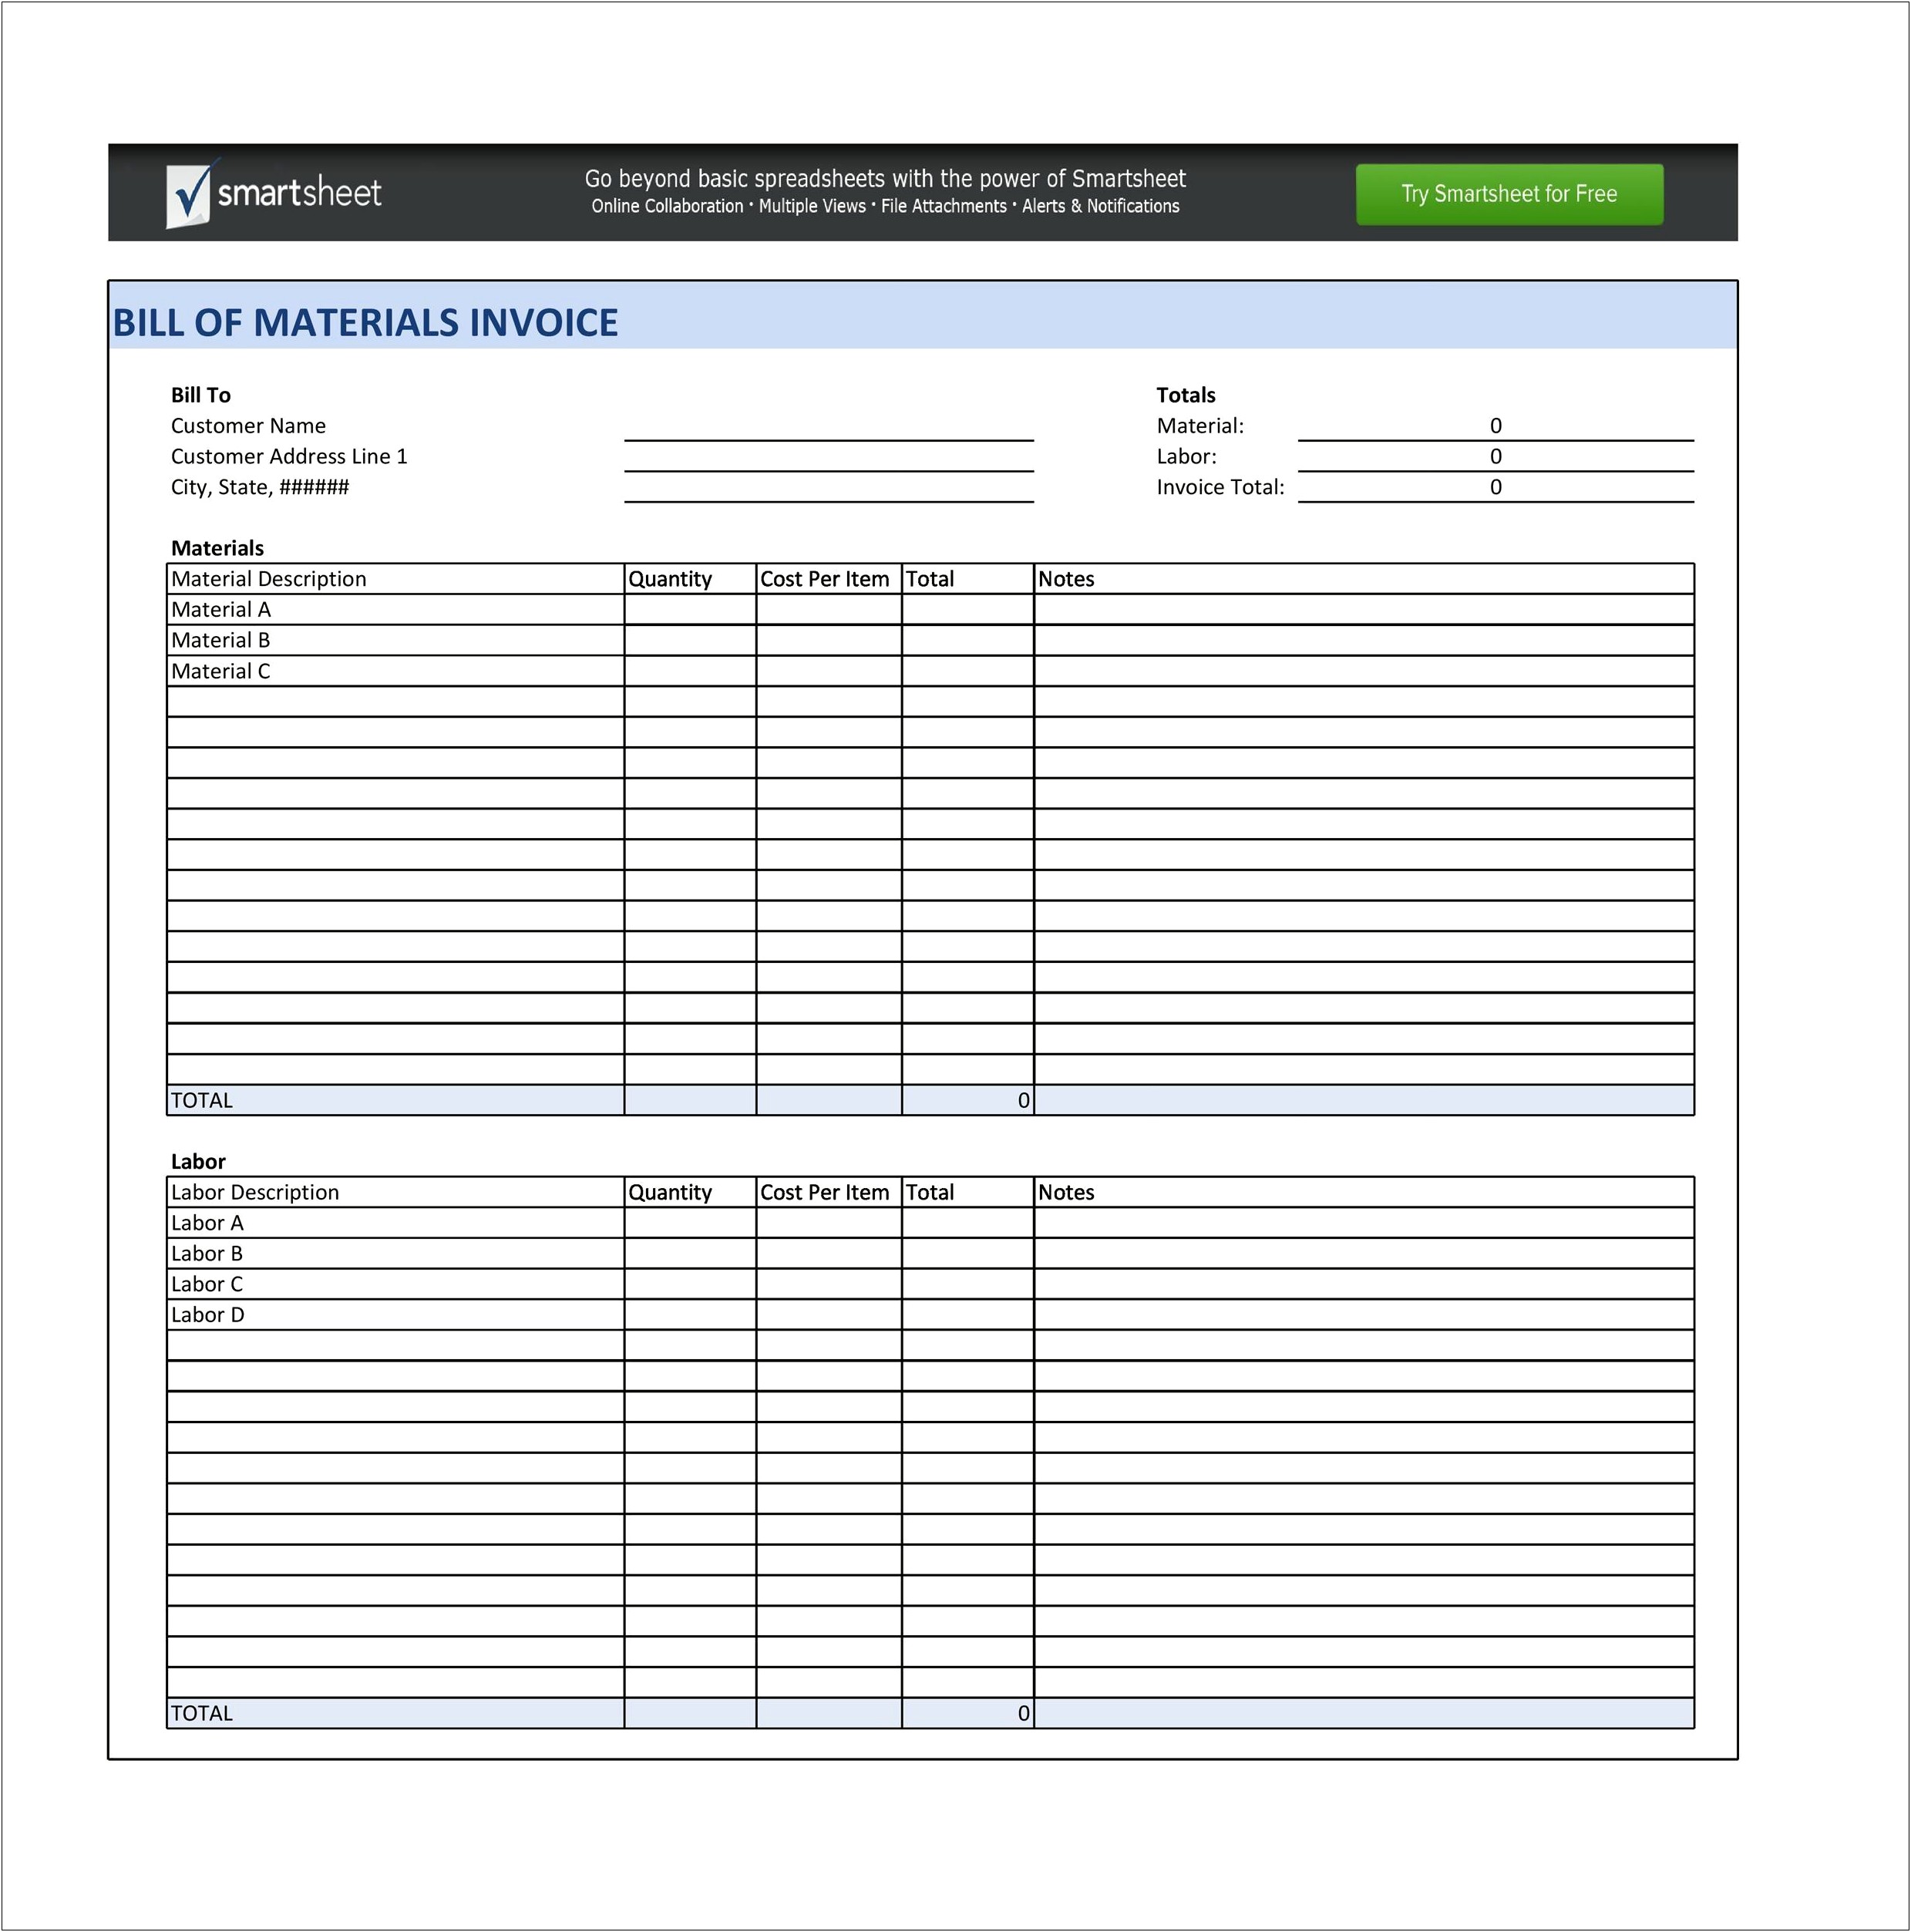 access-bill-of-materials-template-free-resume-example-gallery